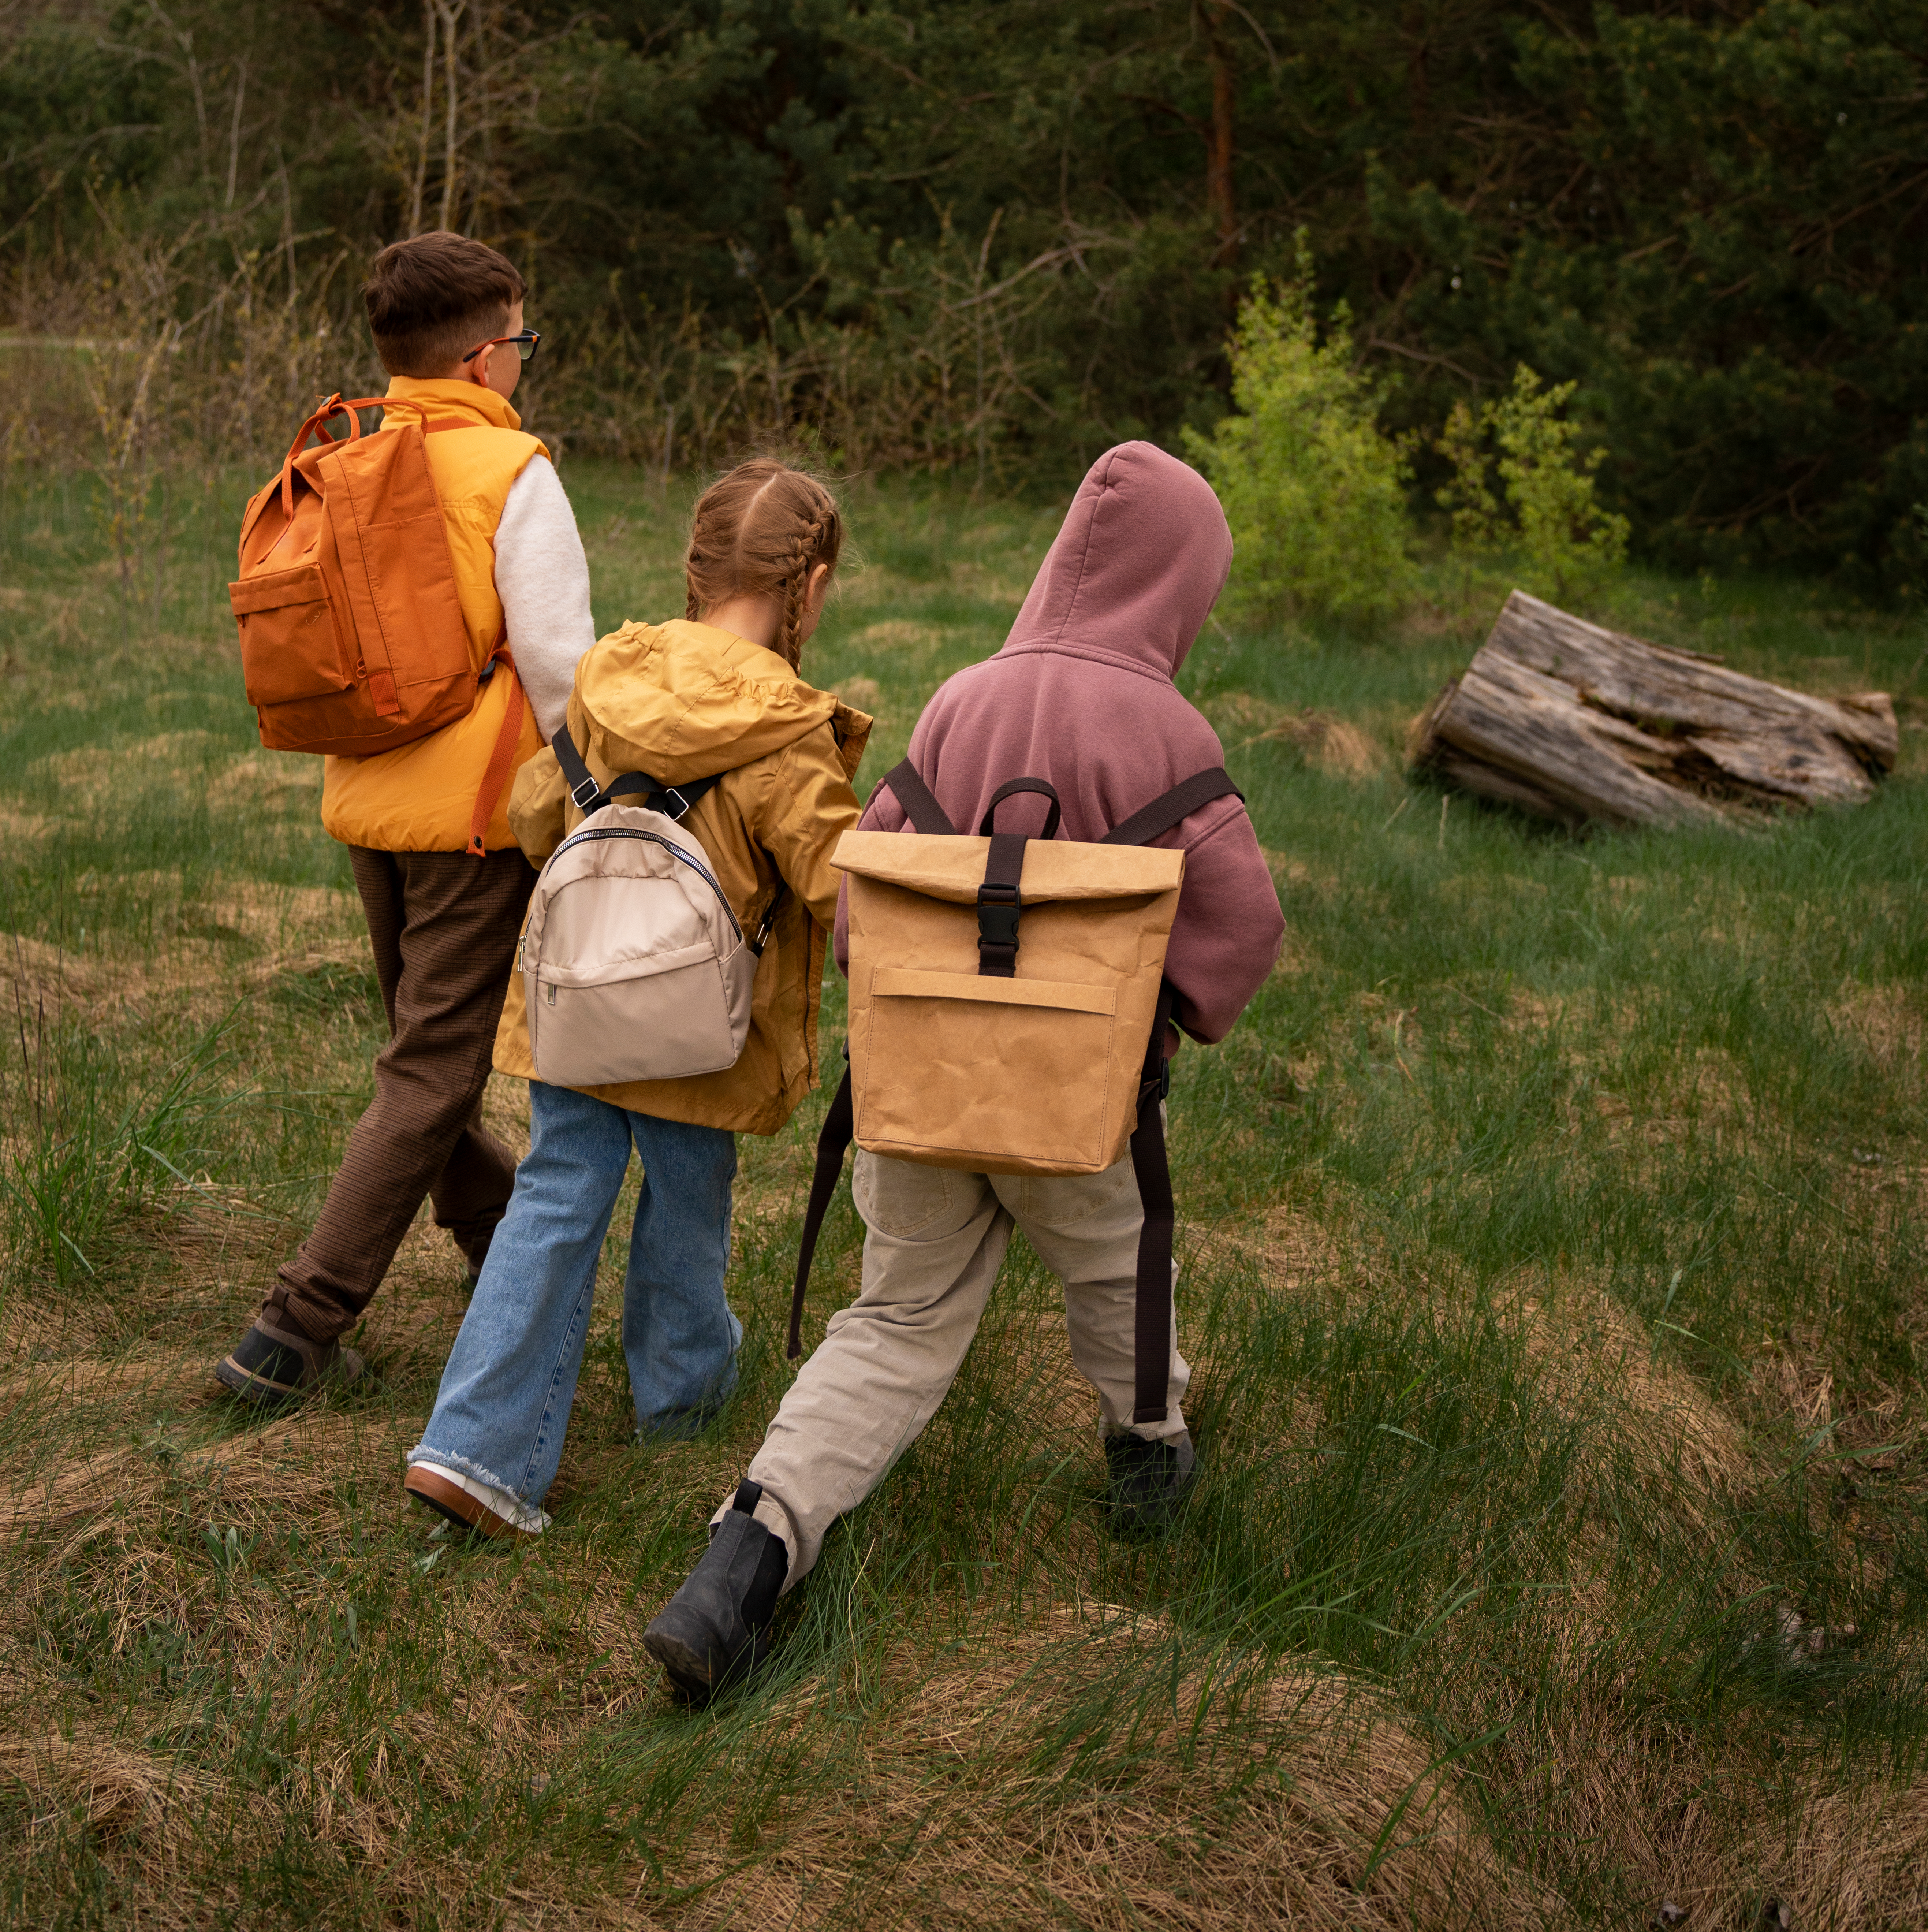 view-little-kids-with-backpacks-spending-time-nature-outdoors